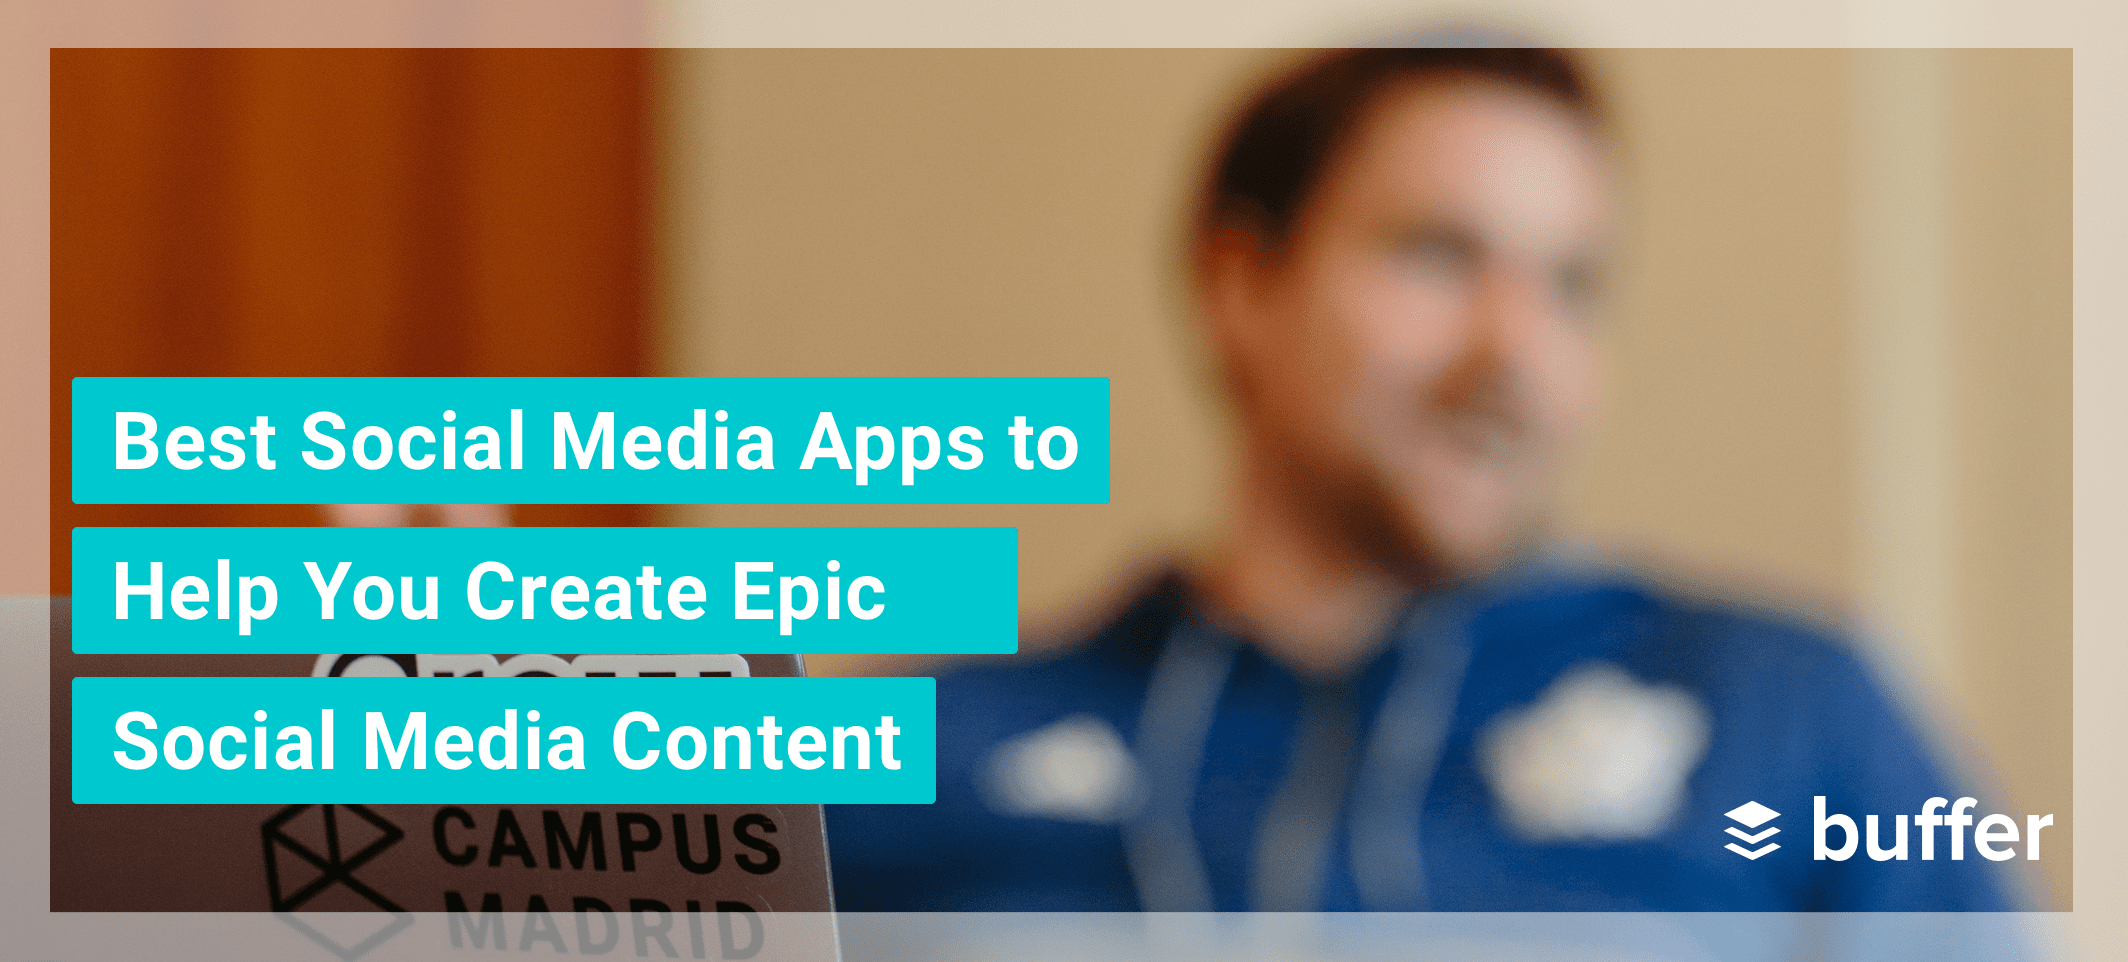 26 Best Social Media Apps to Help You Create Epic Social Media Content